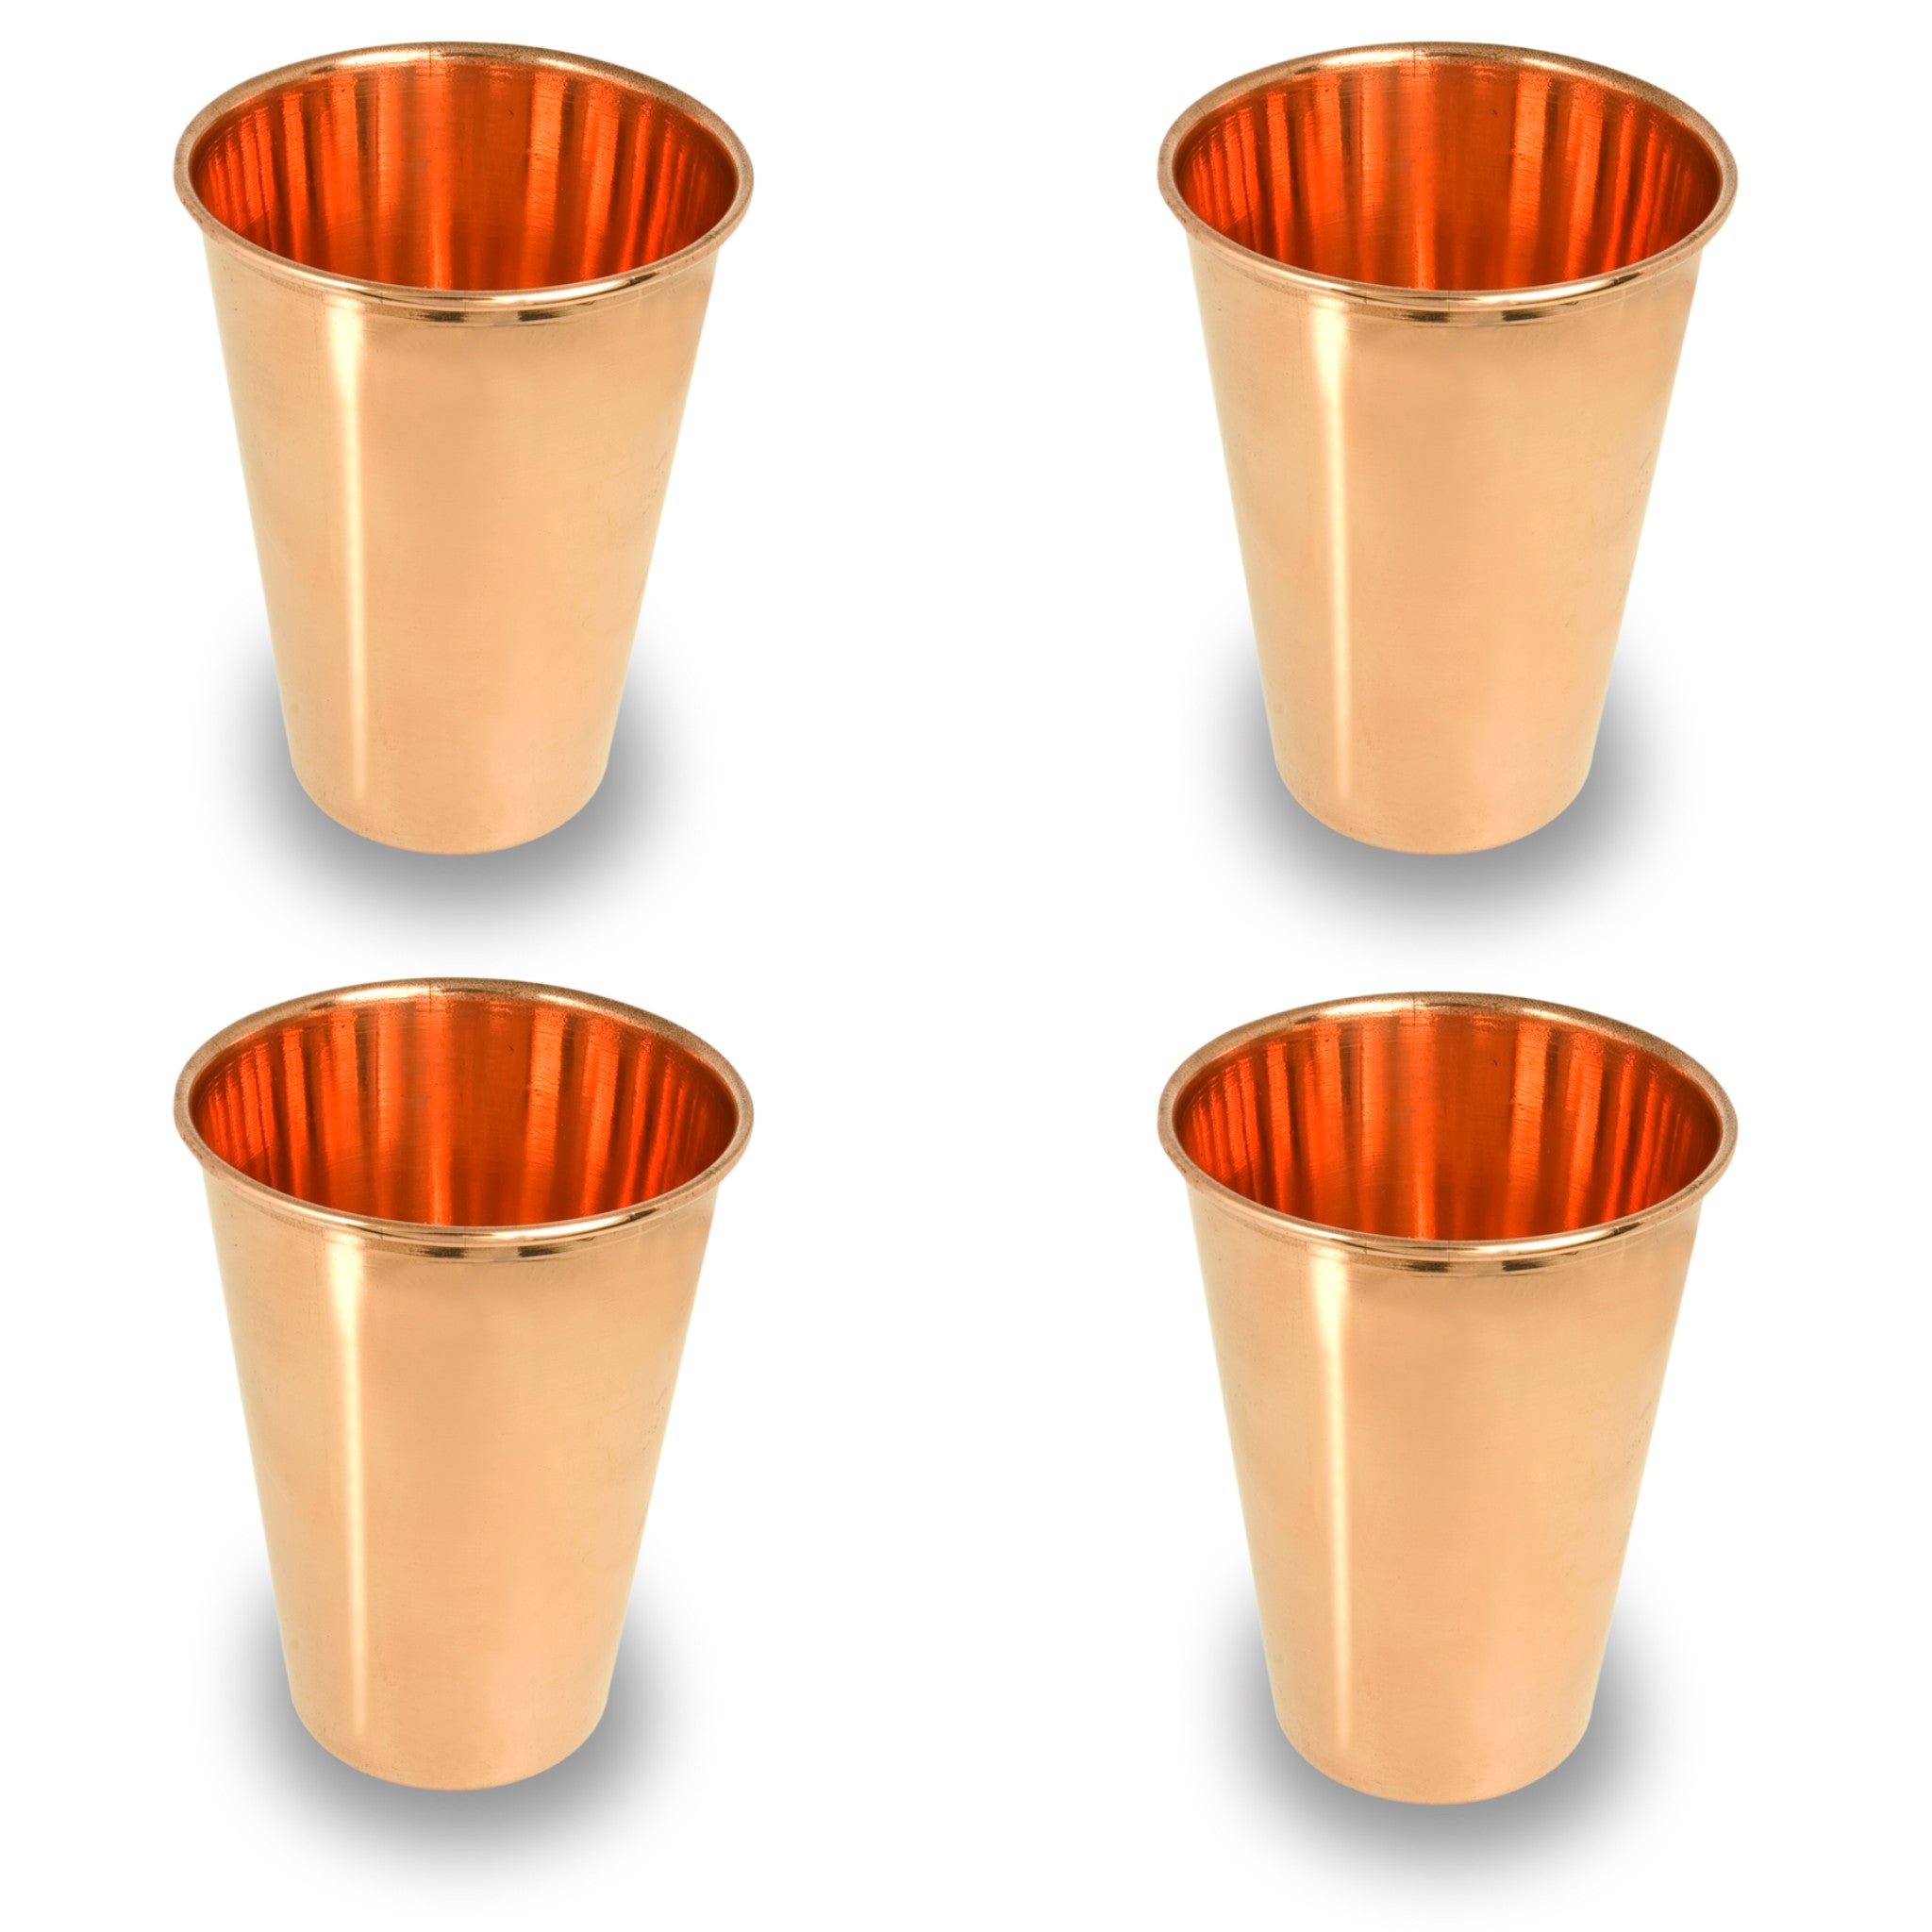 Ayurvedic pure copper drinking cups